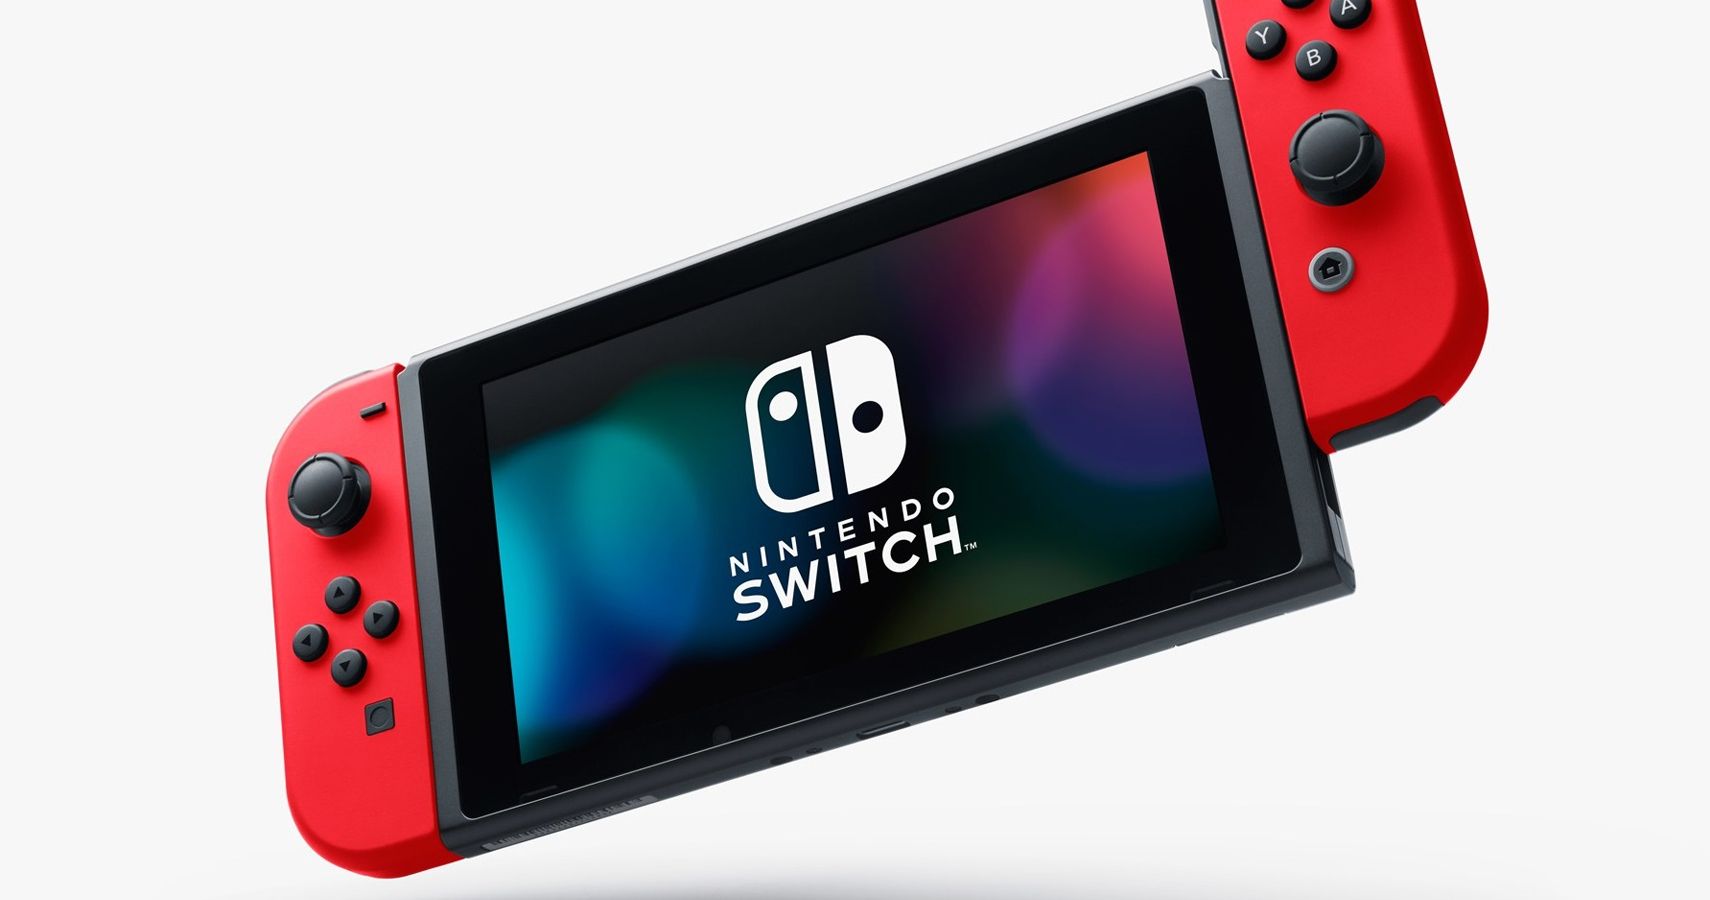 Nintendo Switch Docked And Undocked Play Times Are About Even